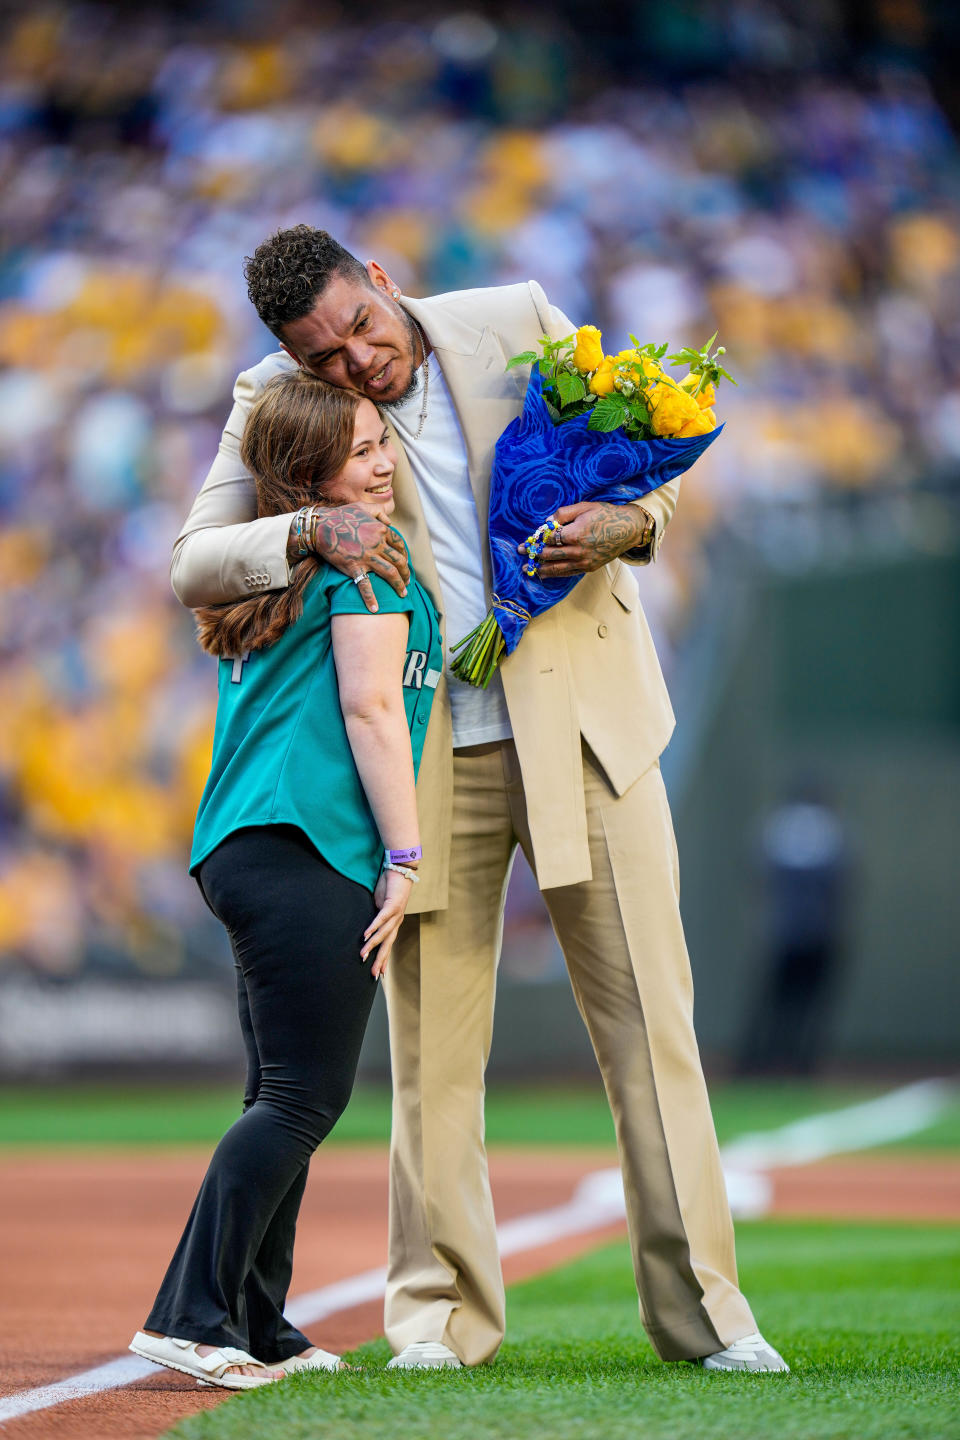 Former Seattle Mariners pitcher Felix Hernandez hugs Sophia Robinson, whom he had met through the Make-A-Wish Foundation when she was younger. She surprised Hernandez during his induction into the Mariners Hall of Fame.